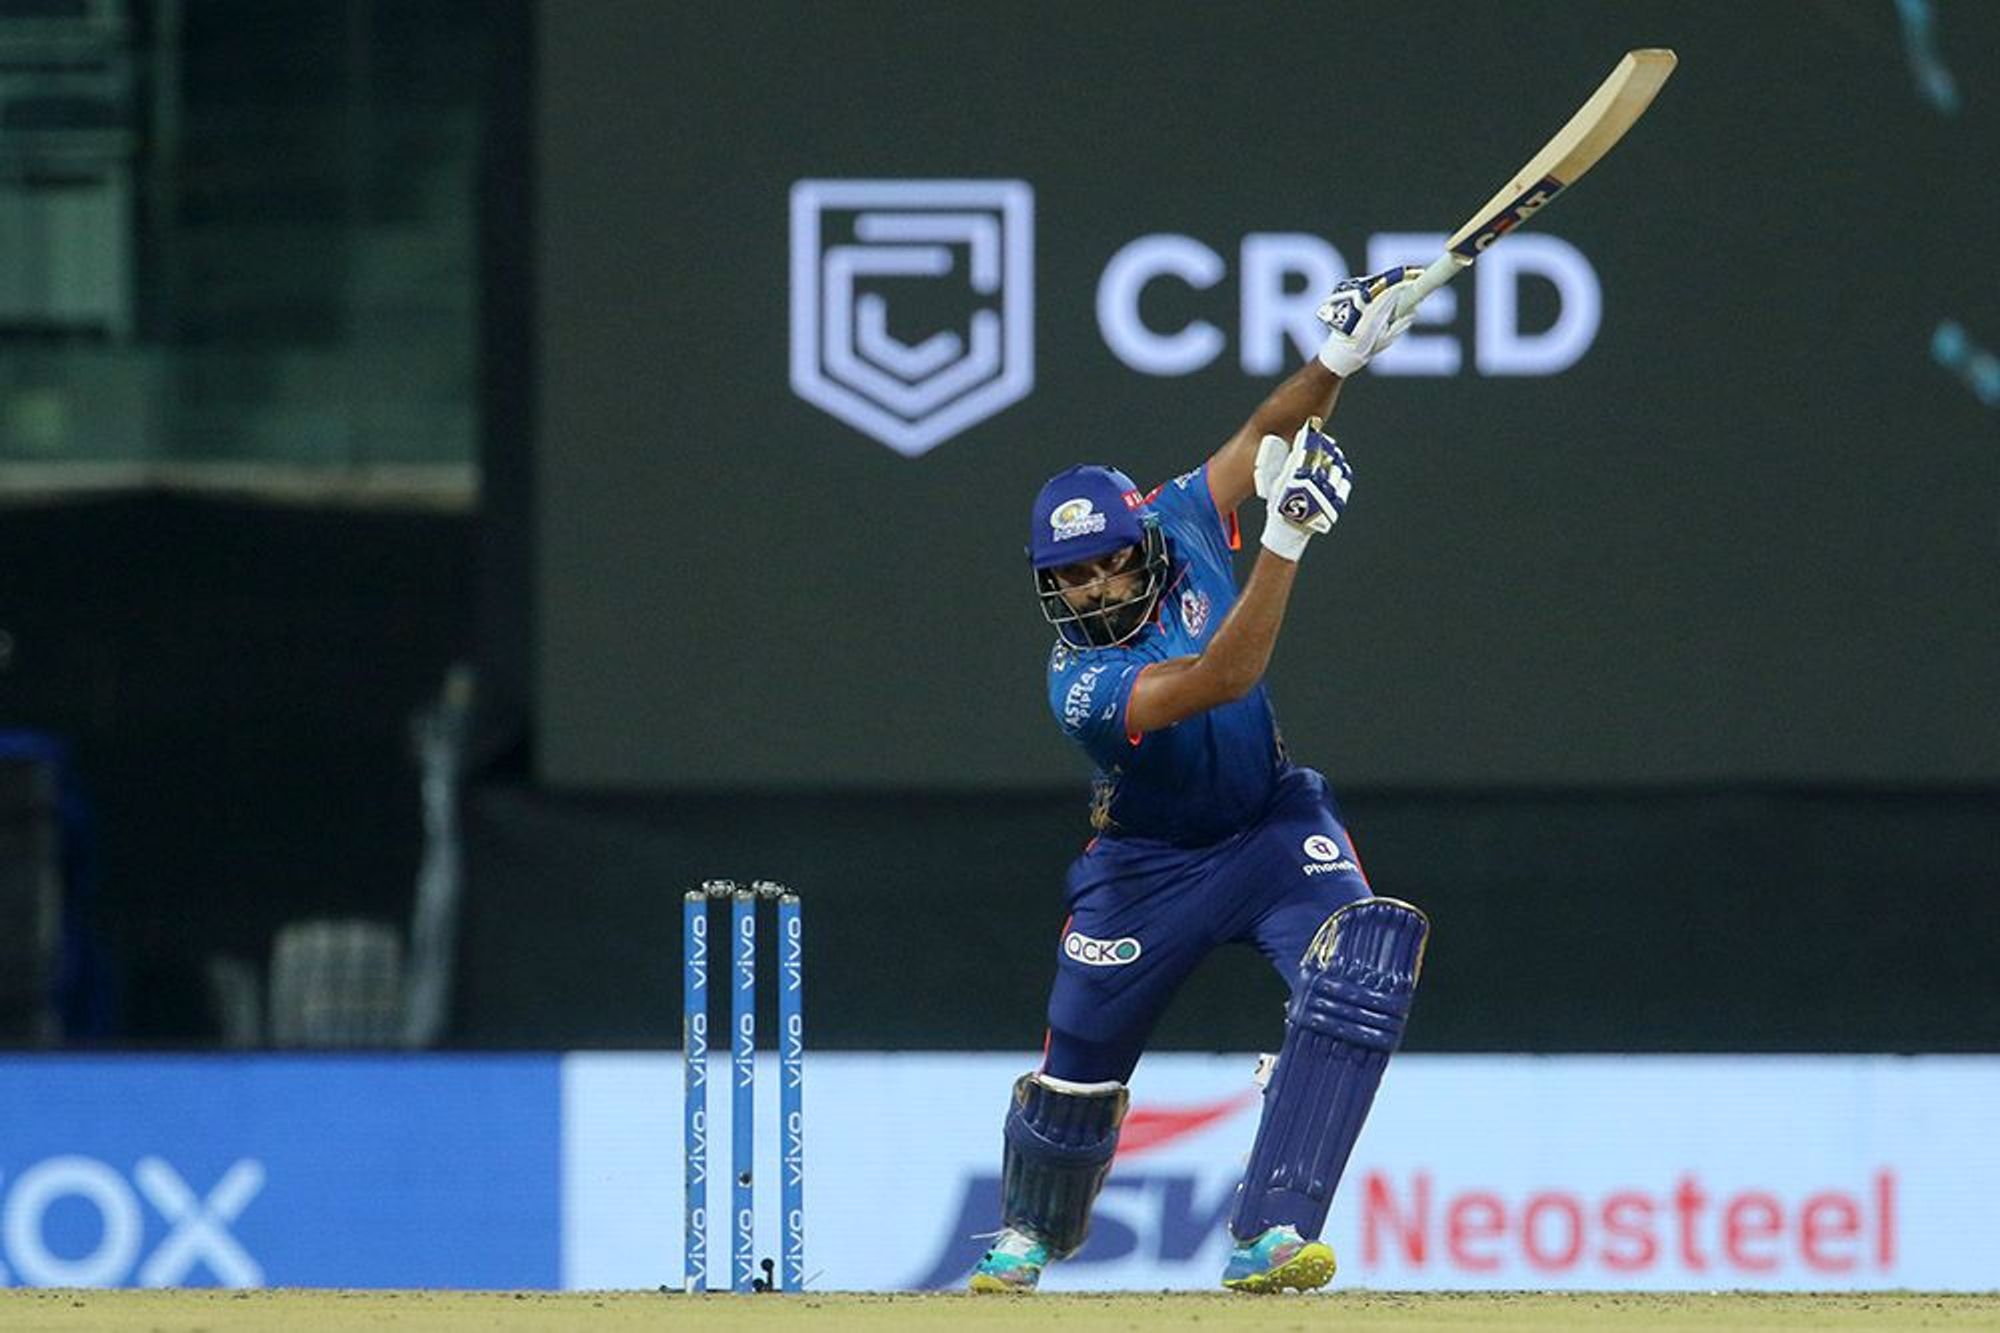 Rohit Sharma made 44 runs before getting out | BCCI-IPL